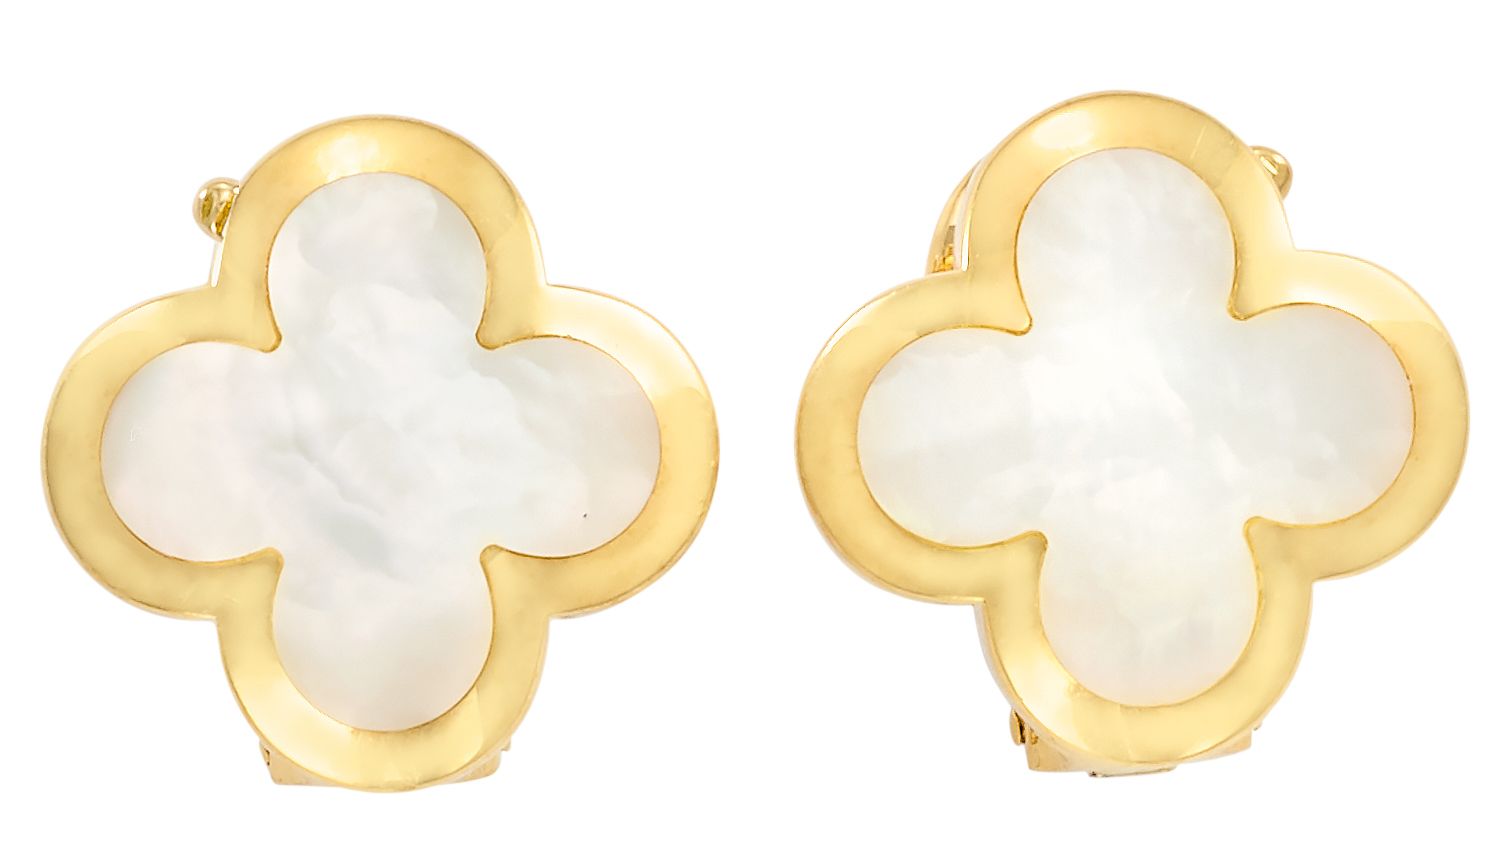 VAN CLEEF & ARPELS Alhambra" collection
Ear clips in yellow gold decorated with &hellip;